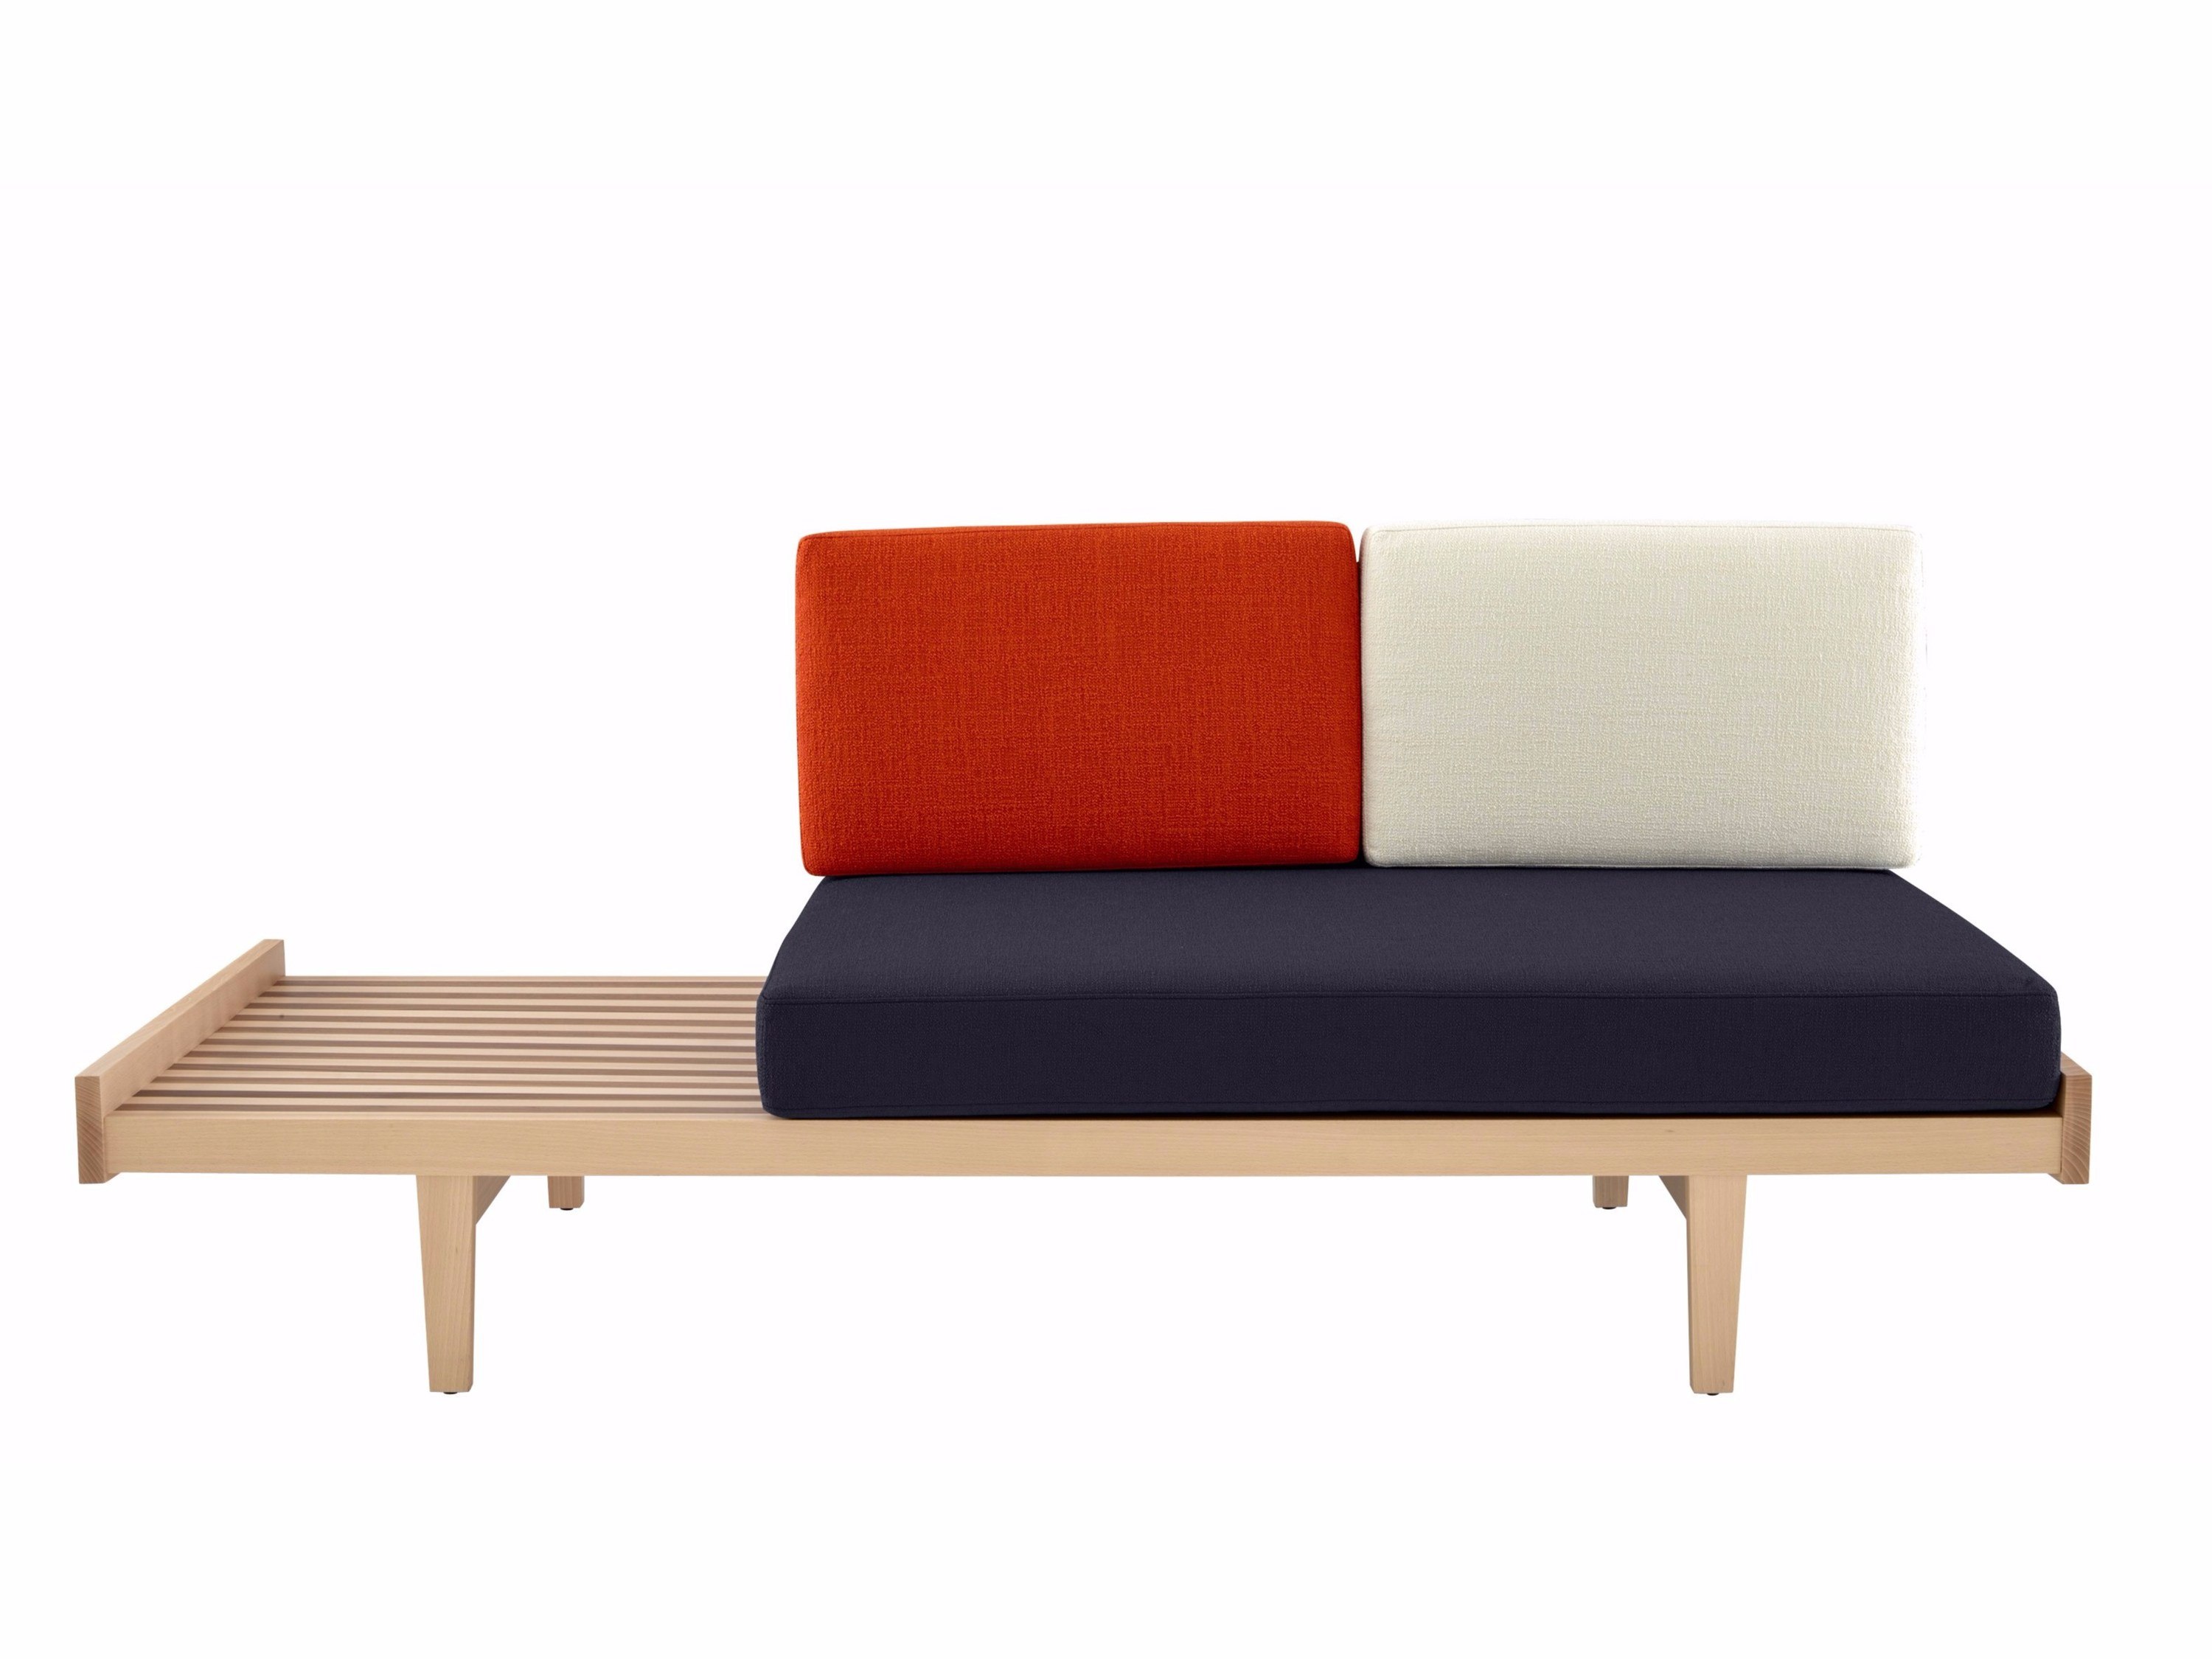 Ligne Roset Revisits 1950s Nordic Design With The Recreation Of Pierre